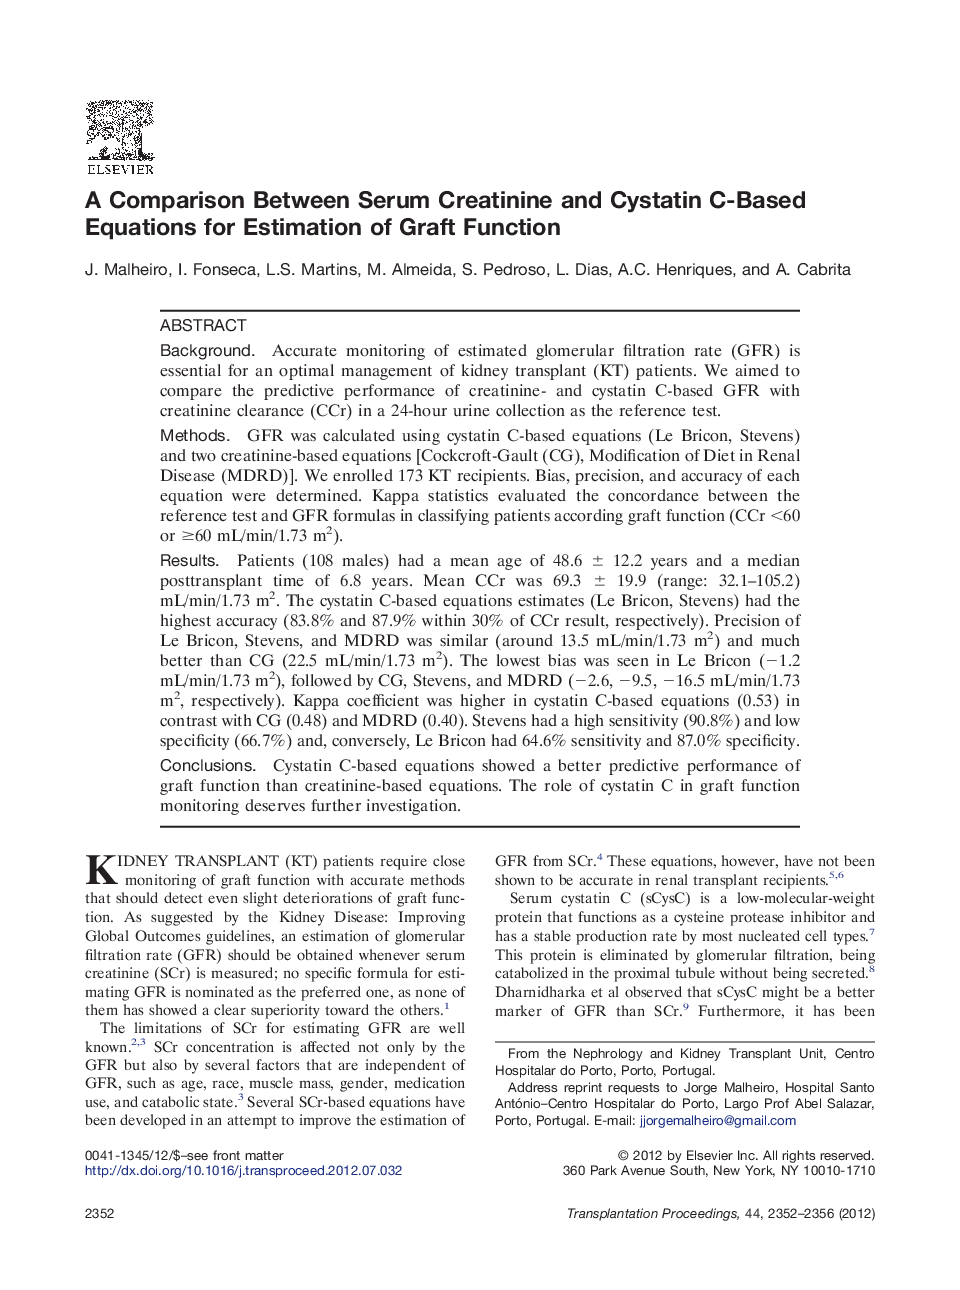 Renal transplantationOutcomesA Comparison Between Serum Creatinine and Cystatin C-Based Equations for Estimation of Graft Function